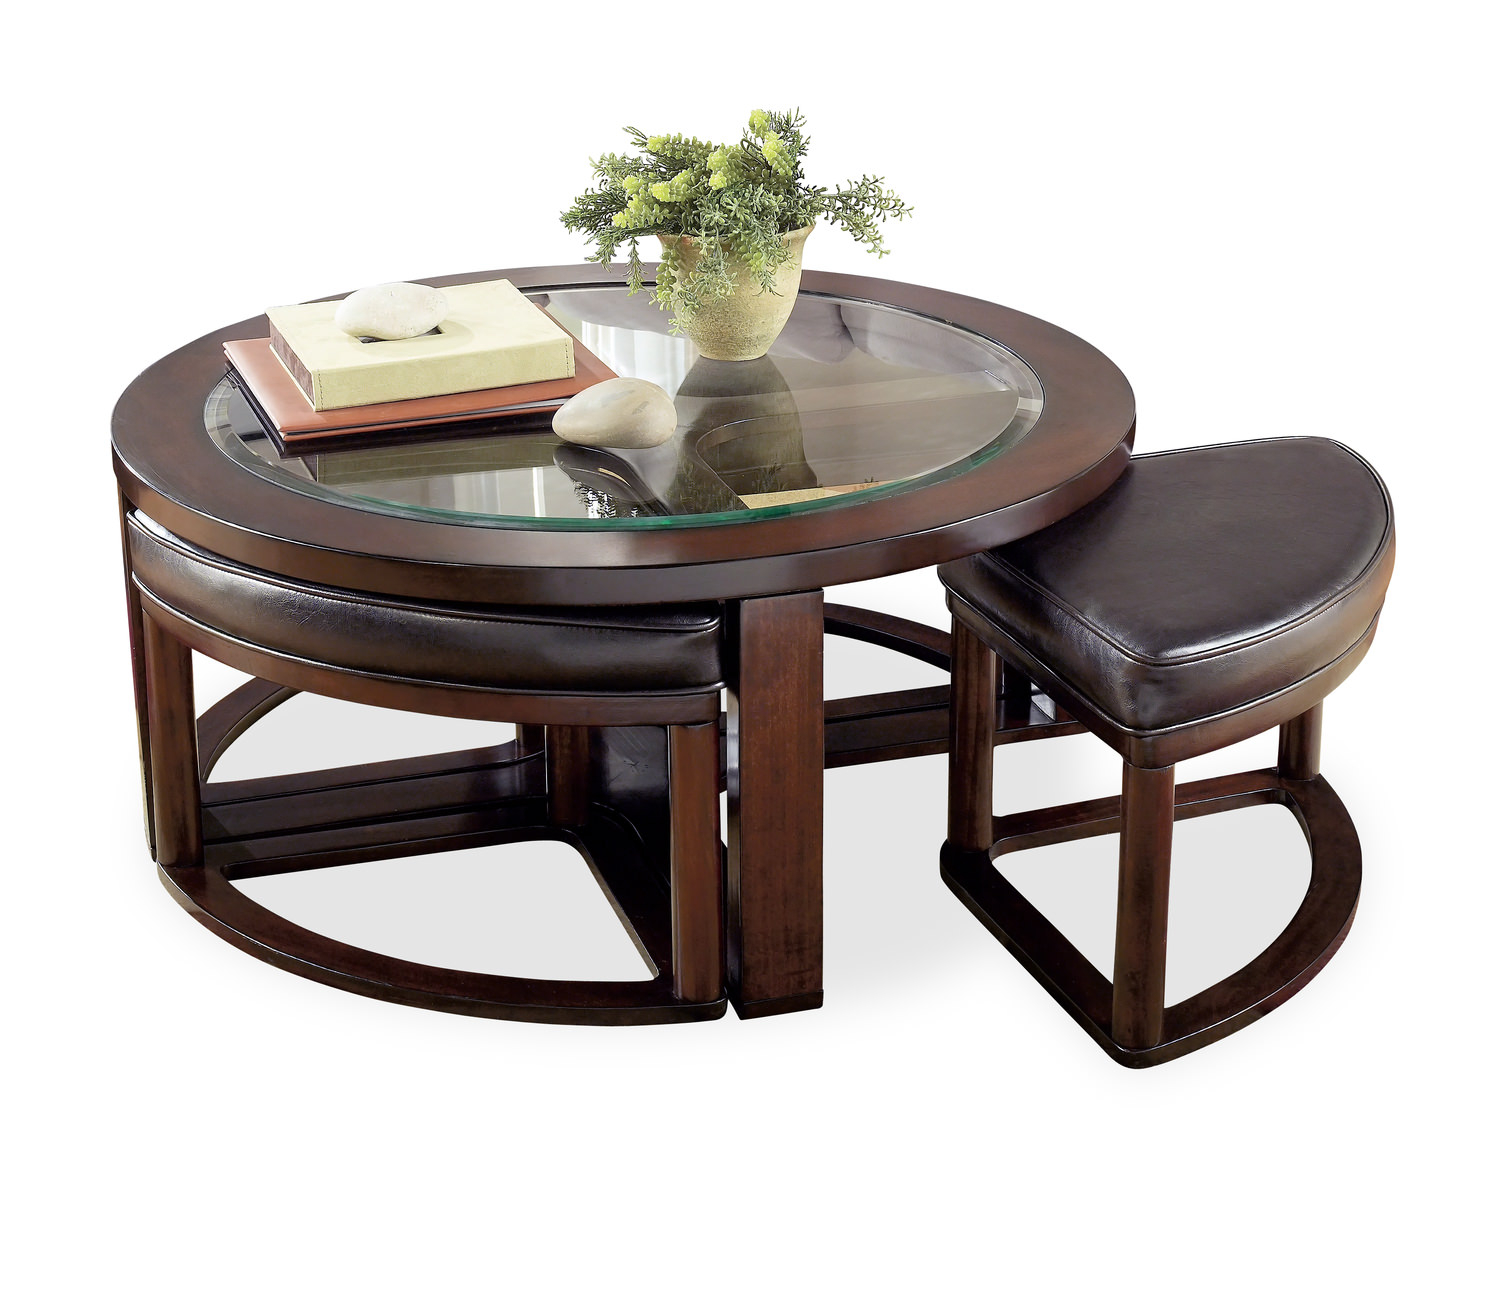 Marion Round Coffee Table With 4 Stools Hom Furniture in measurements 1500 X 1313